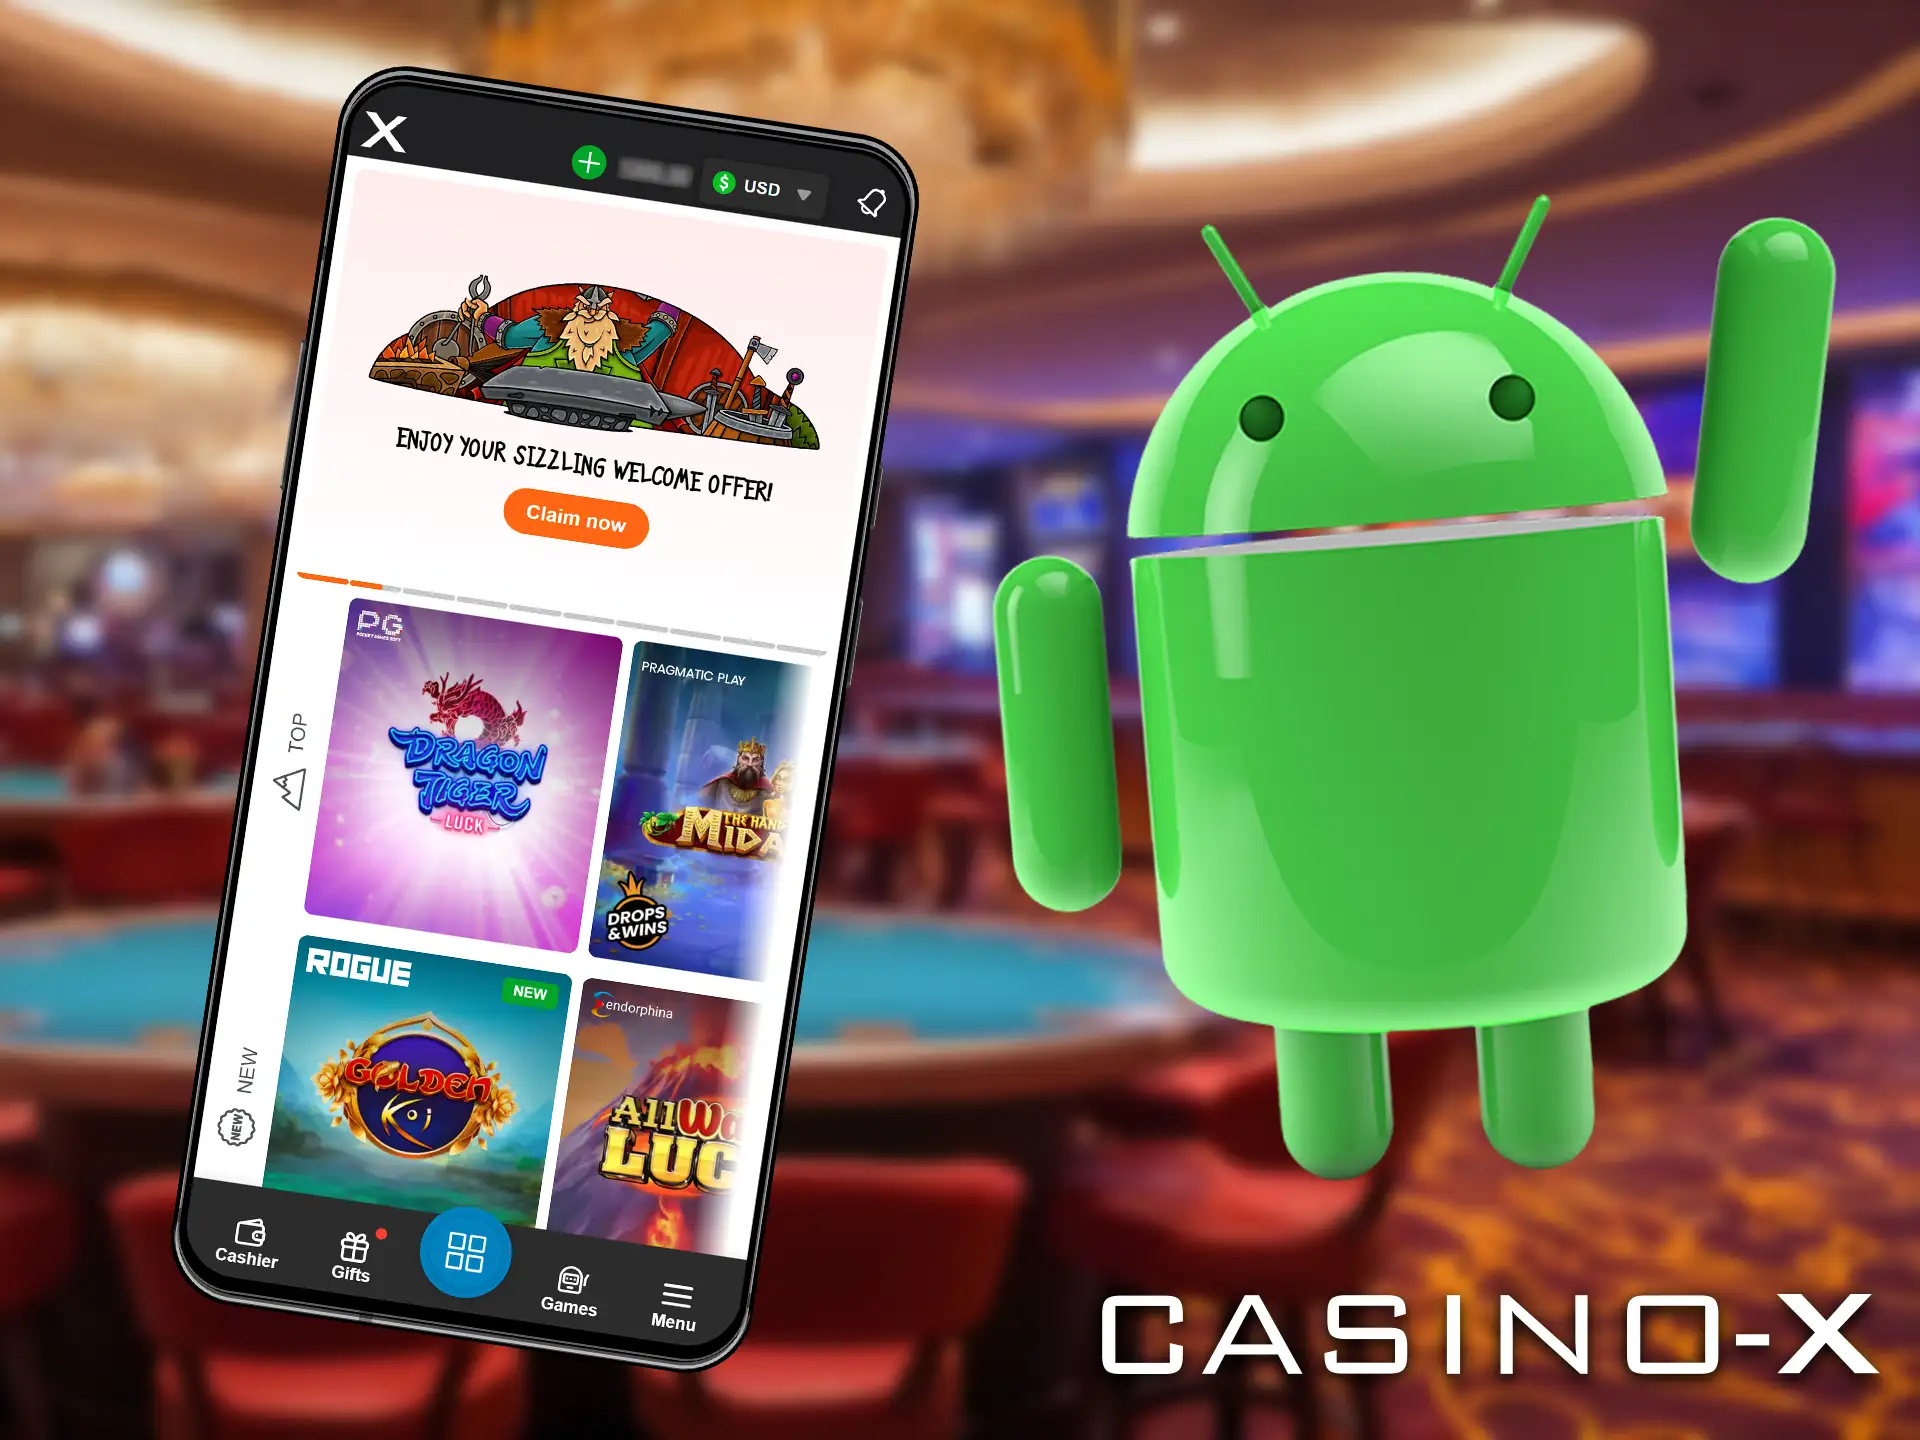 The Casino-X Android app is available on our official website.